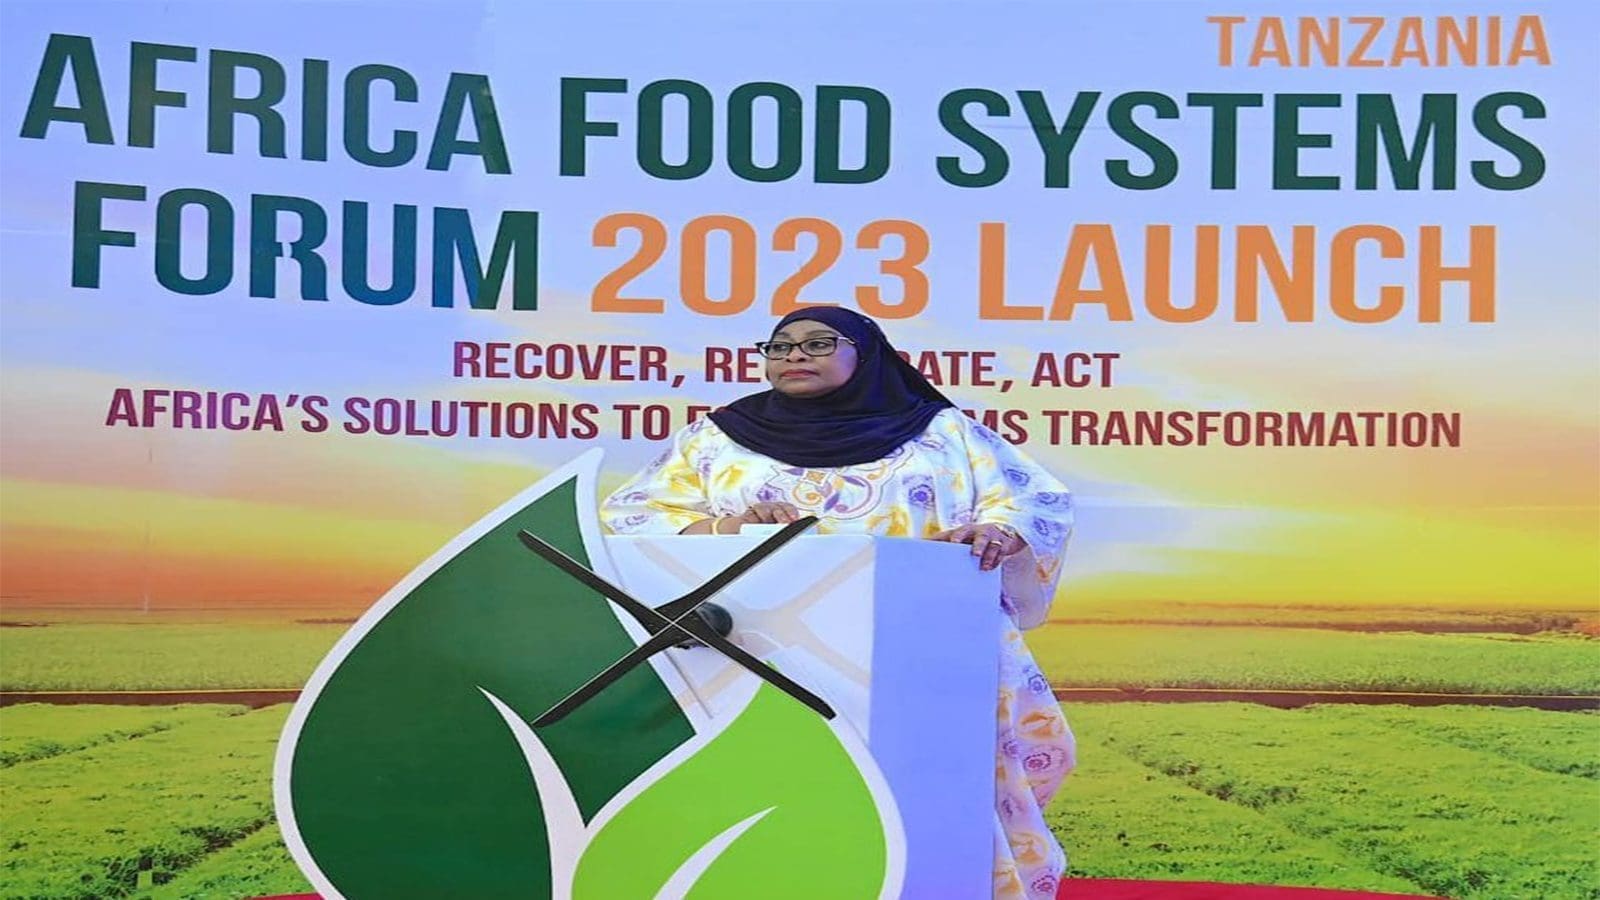 Tanzania’s President Dr. Samia Suluhu launches Africa’s Food System Forum 2023